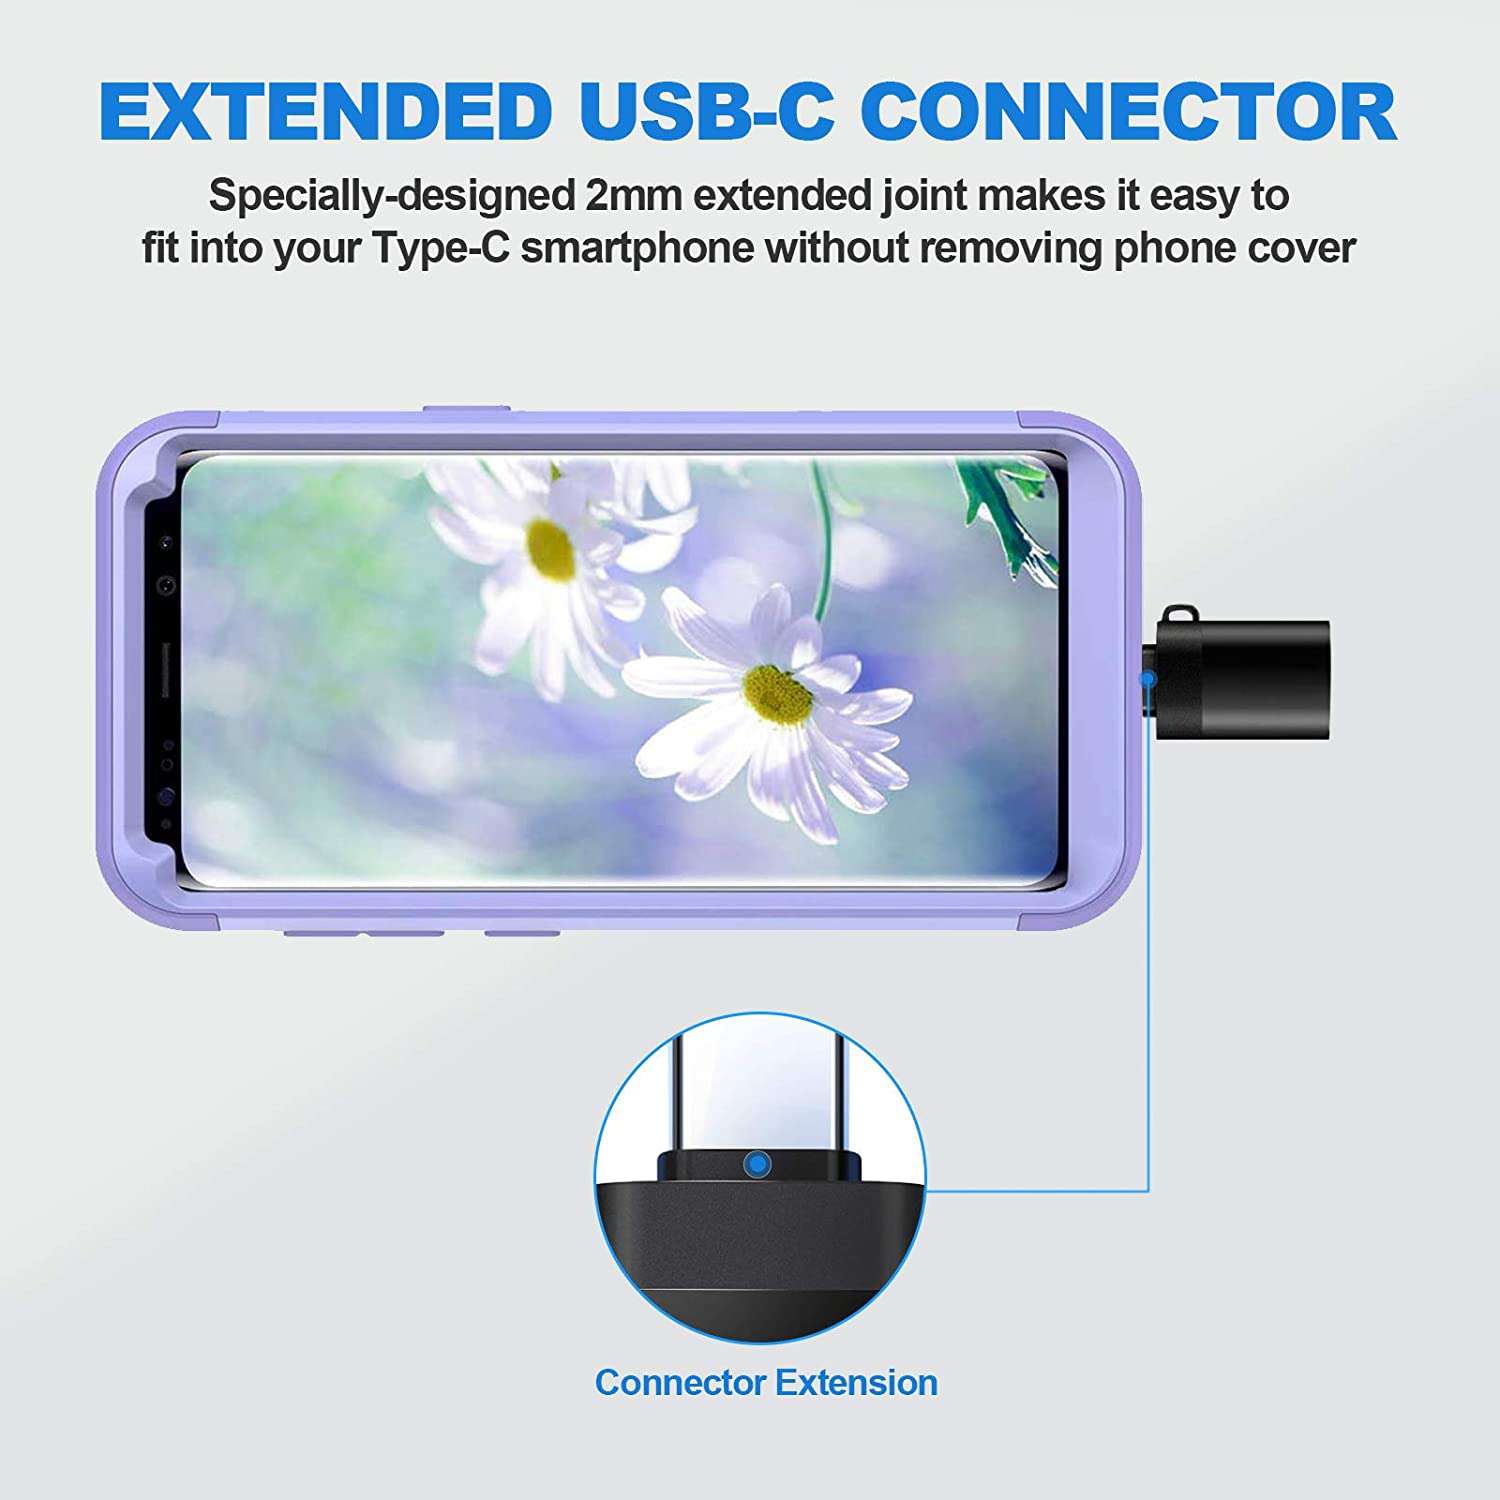 The adapter features a design with a built-in anti-loss loop and is compact in size